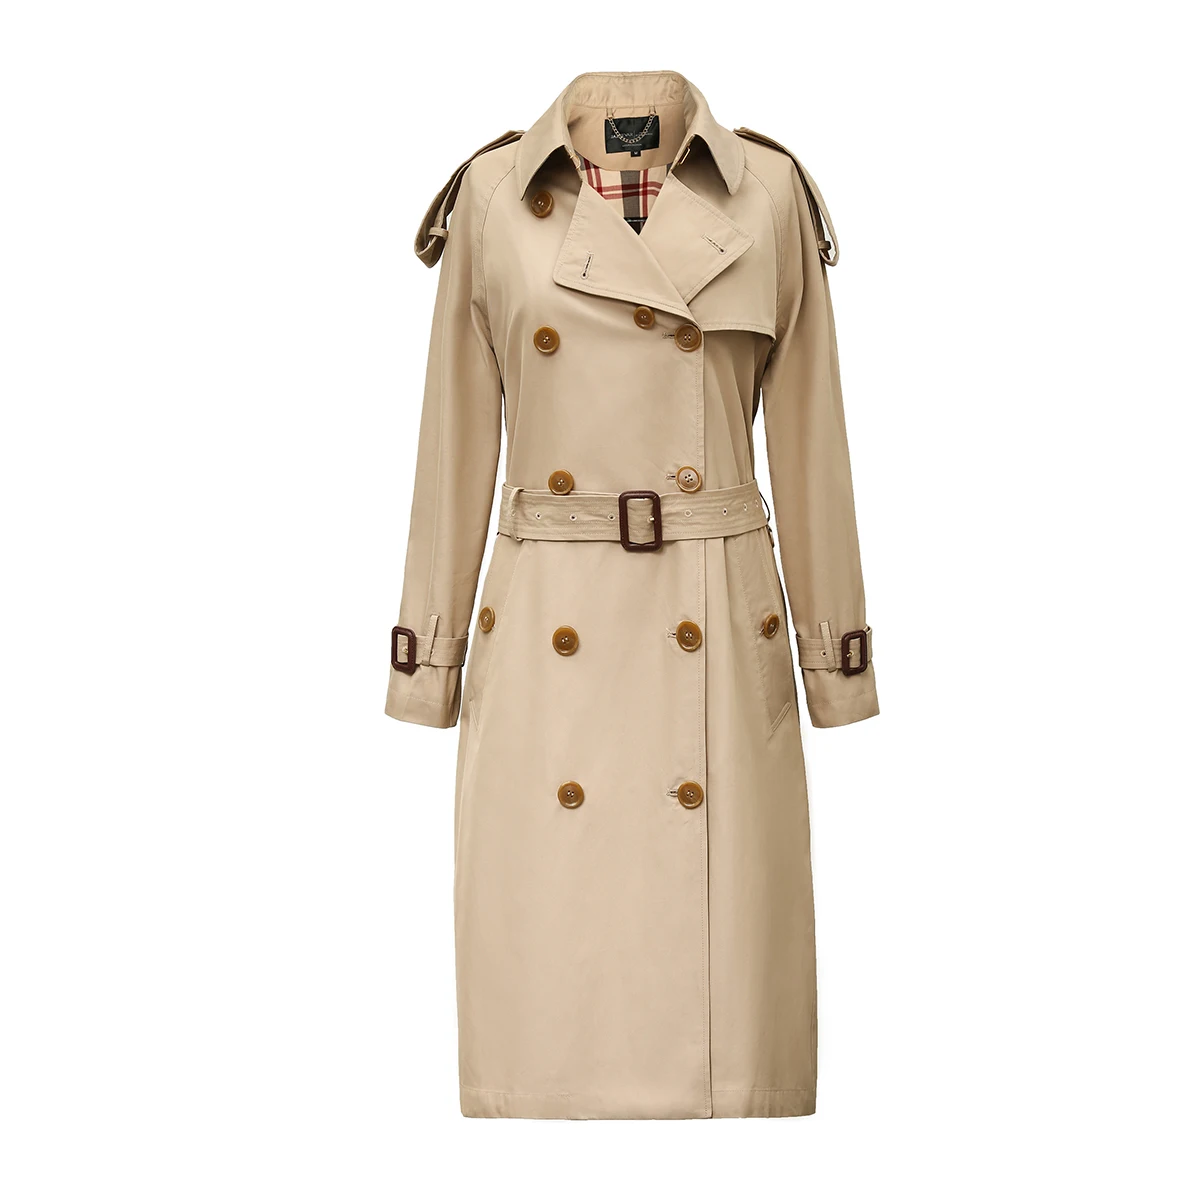 New High Fashion Women's Waterproof Cotton Long Double-breasted The Westminster Heritage Trench Coat [fila]heritage women s wide leg pants